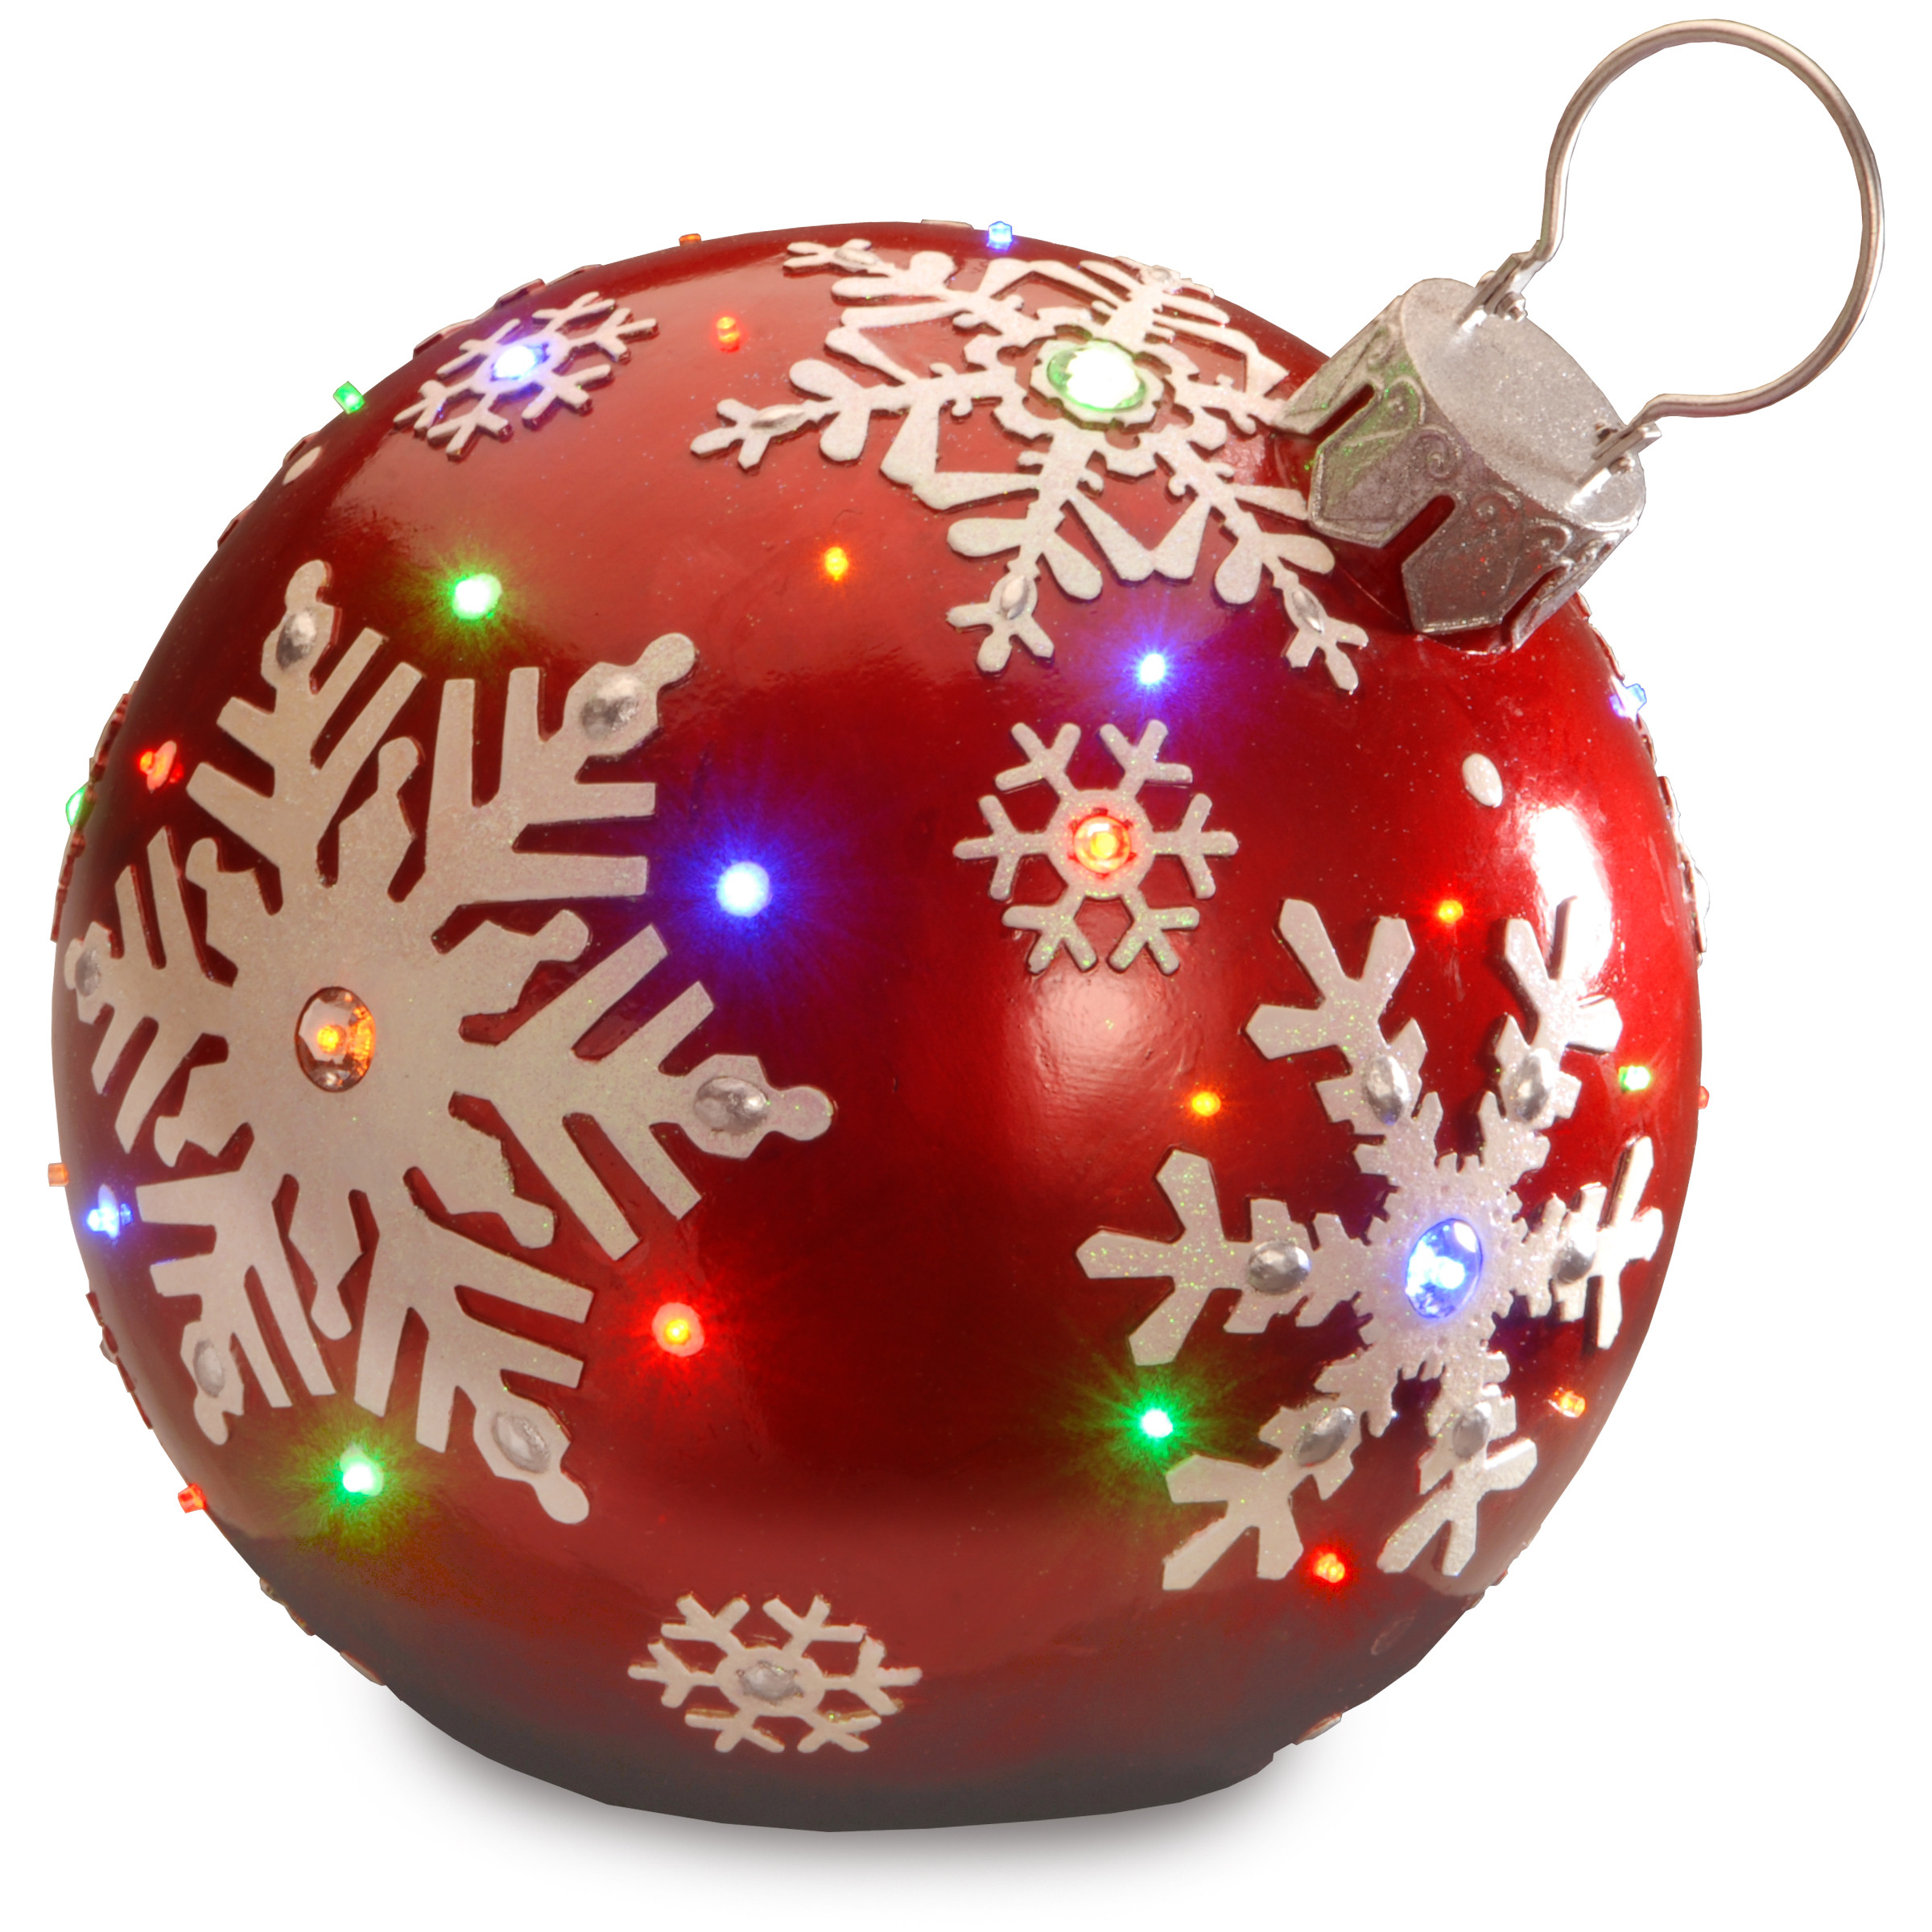 Outdoor Christmas Tree Ornaments
 National Tree pany 18" Red Jeweled Ornament with